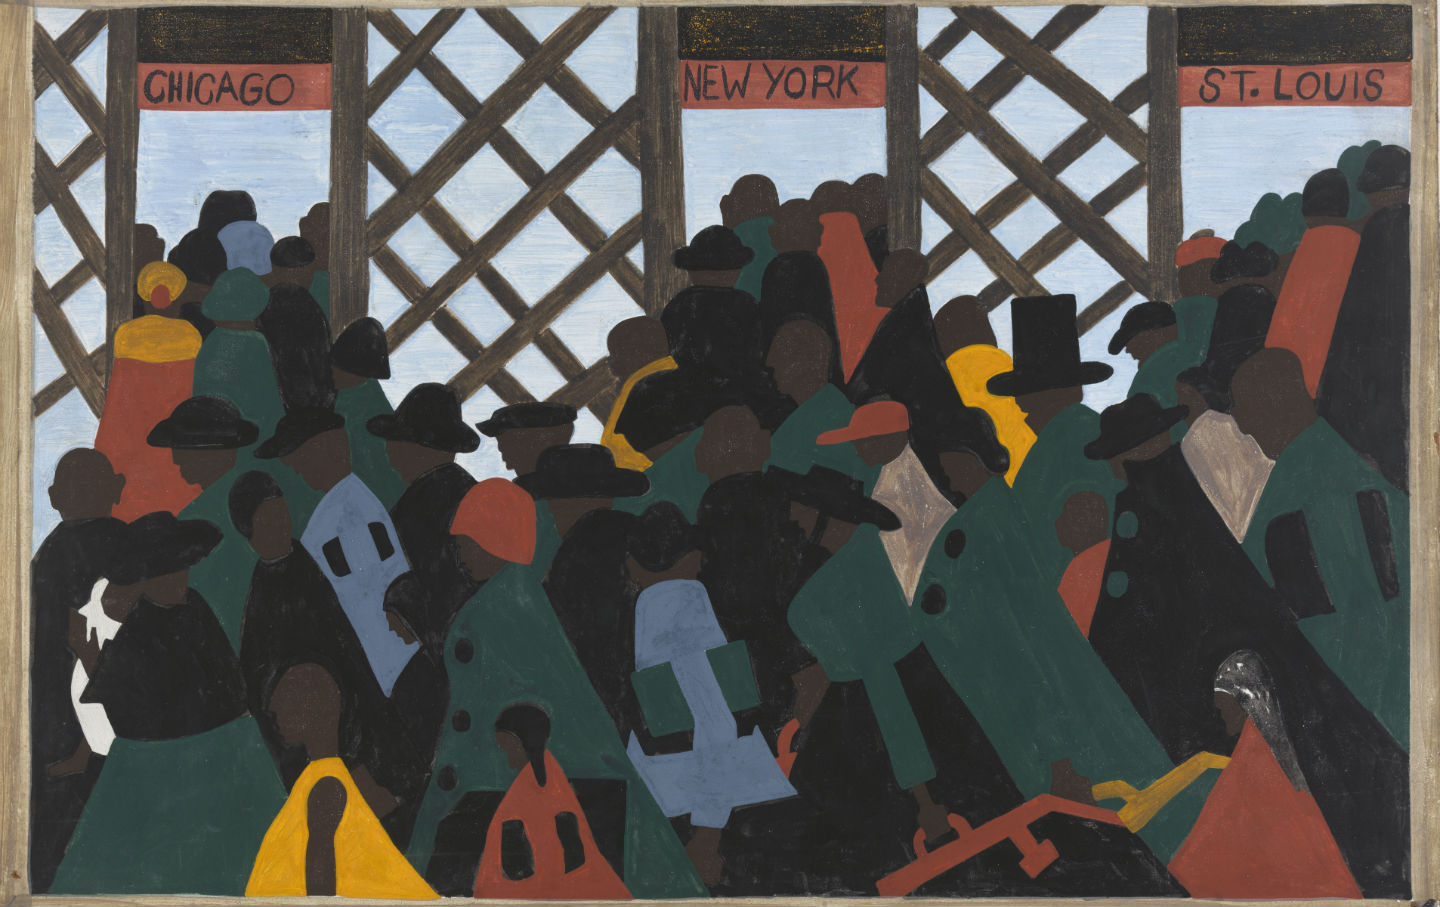 Jacob Lawrence’s Art as Journalism